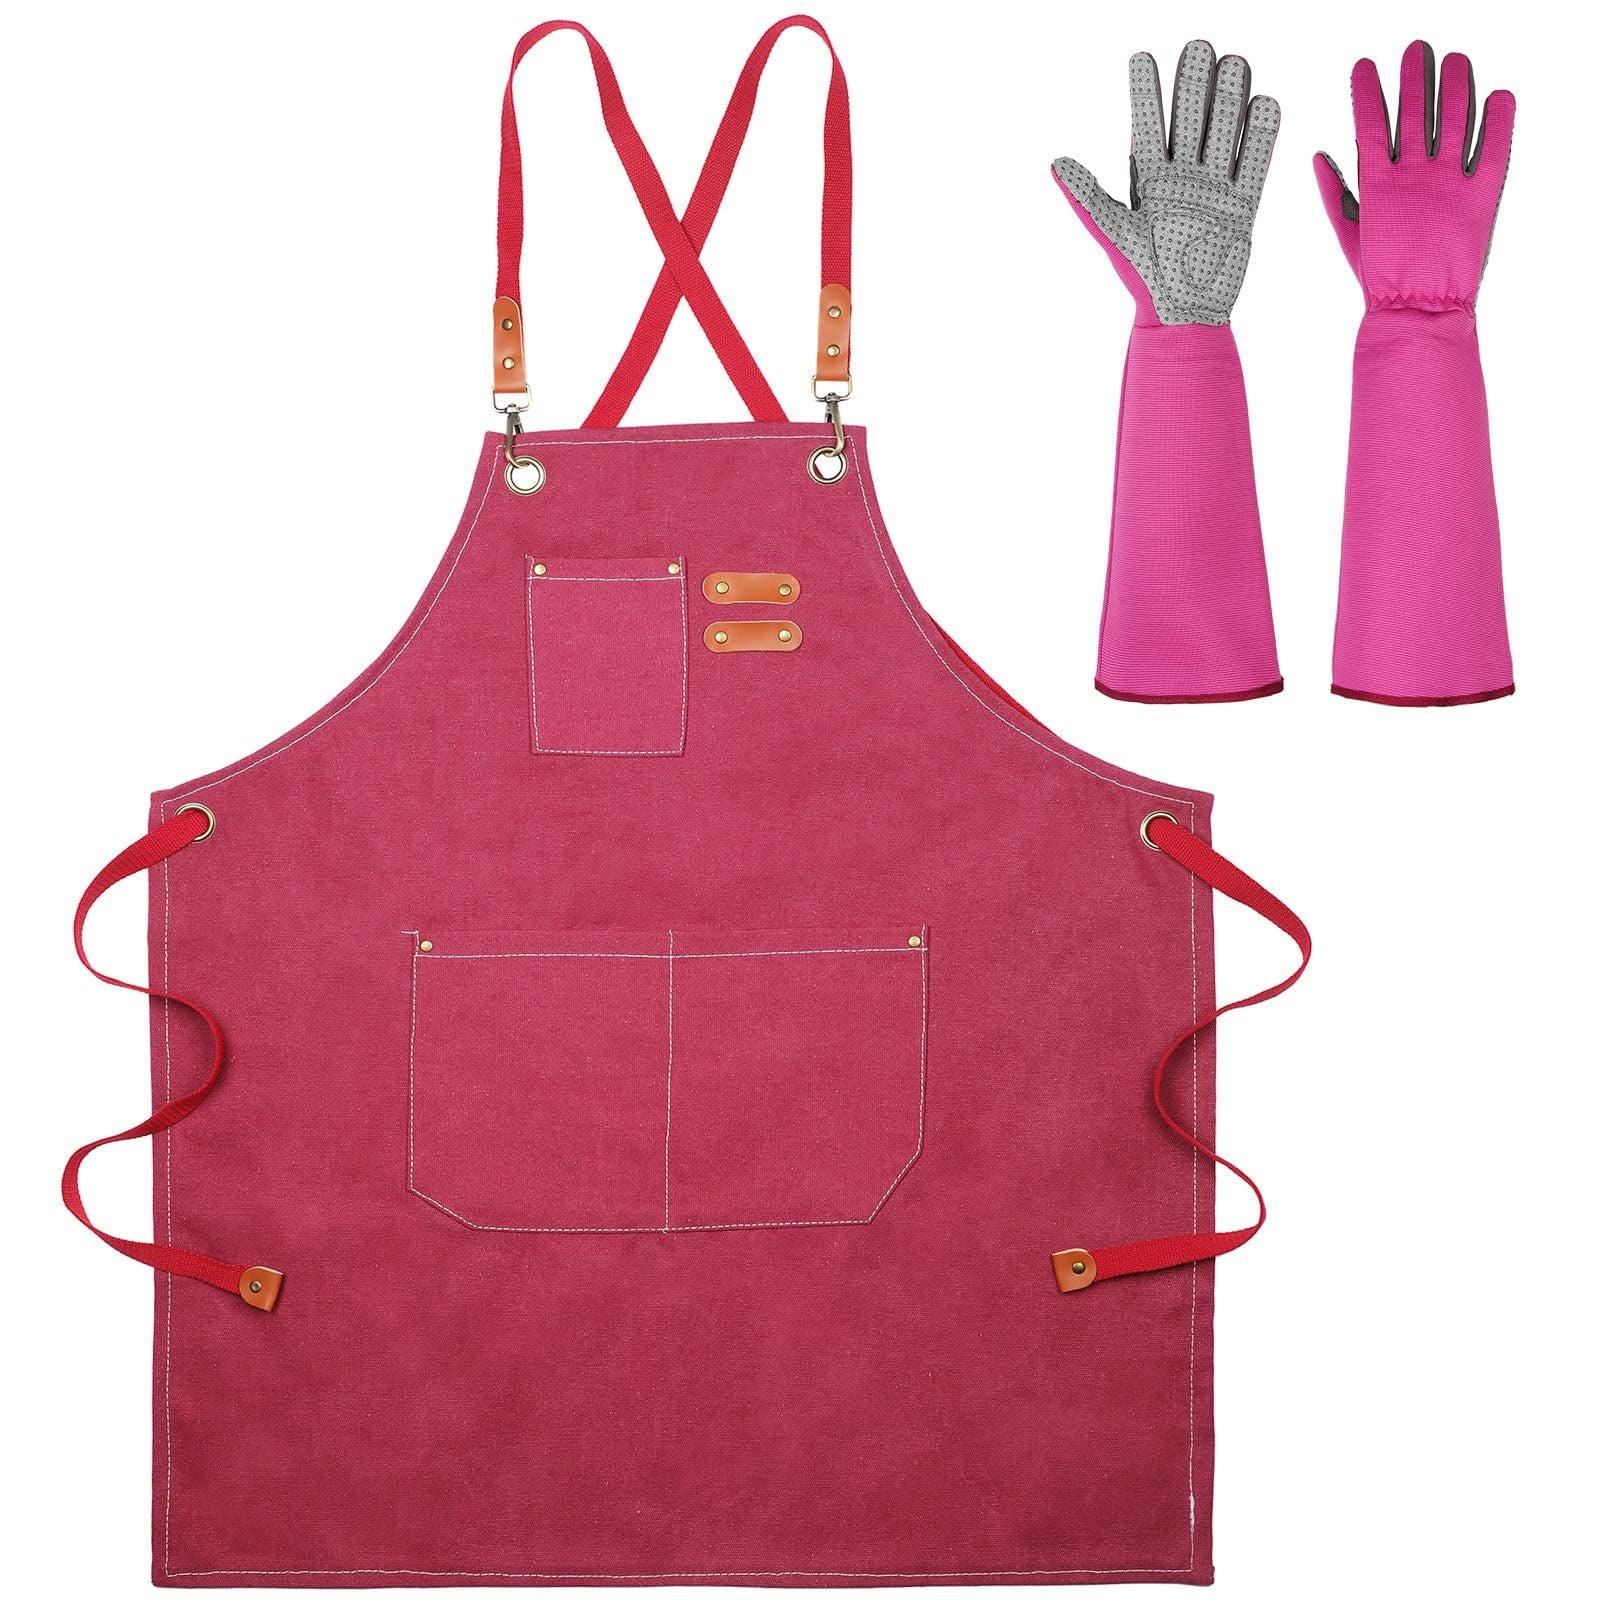 Neer Set of 2 Cooking Aprons Gloves for Women Canvas Apron with Pockets Long Leather Gloves Kitchen Cross Back Apron Red Gardening Gifts for Wife Grandmother 0